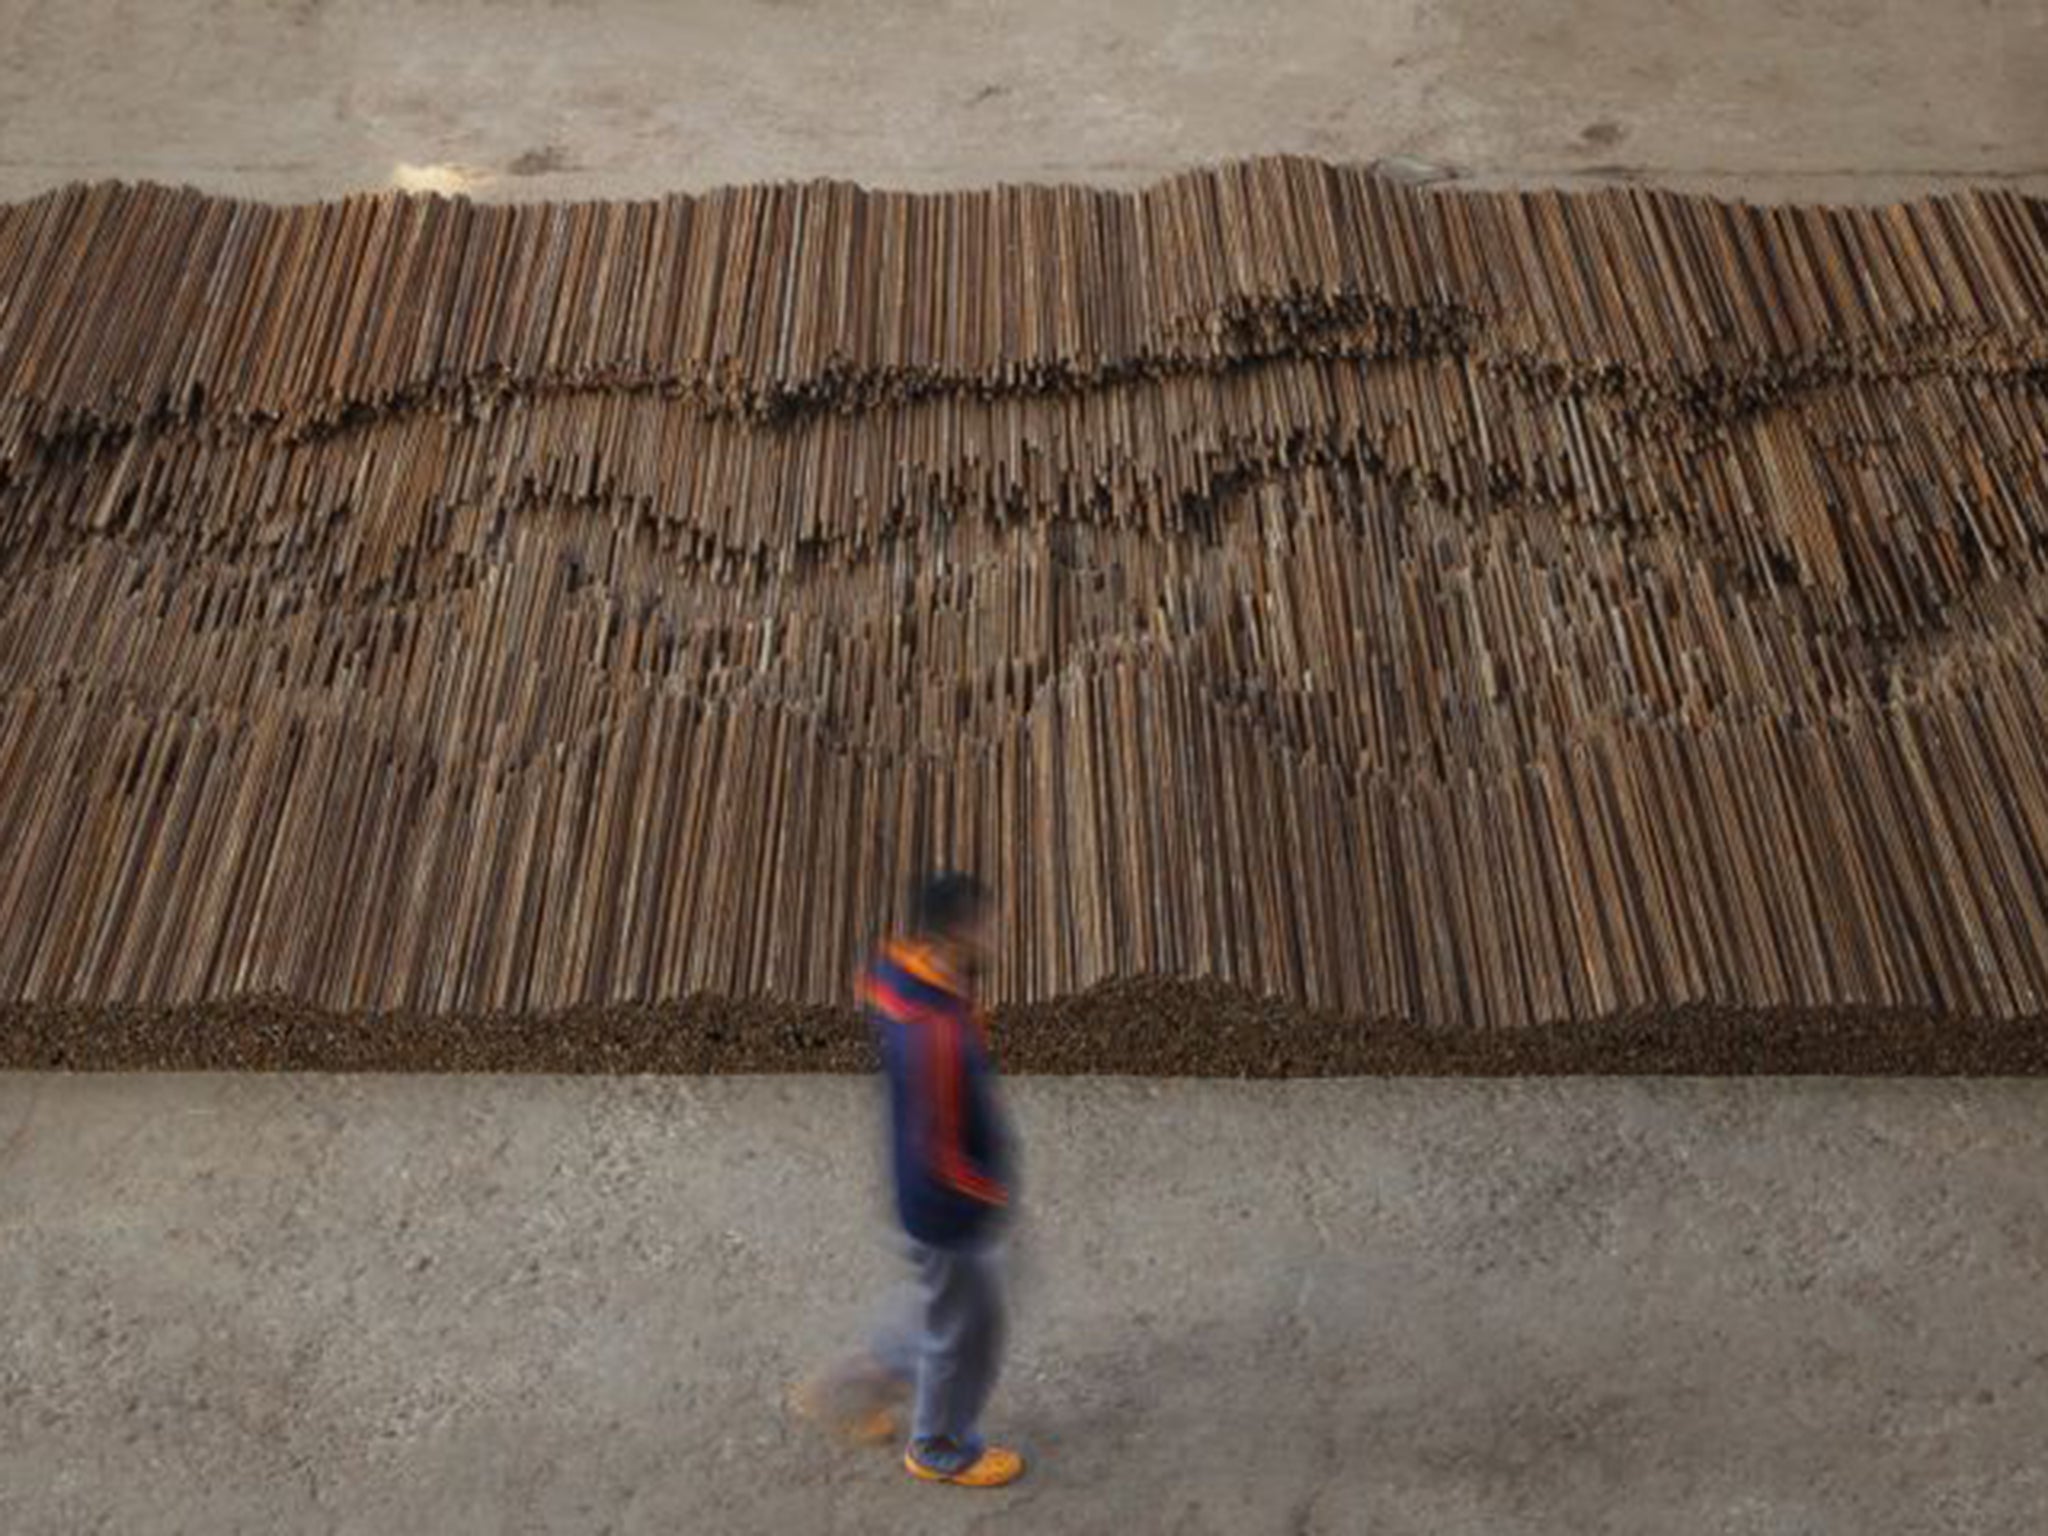 Ai Weiwei’s ‘Straight’ is made with the remnants of buildings damaged in an earthquake, weighing in at 150-tonnes